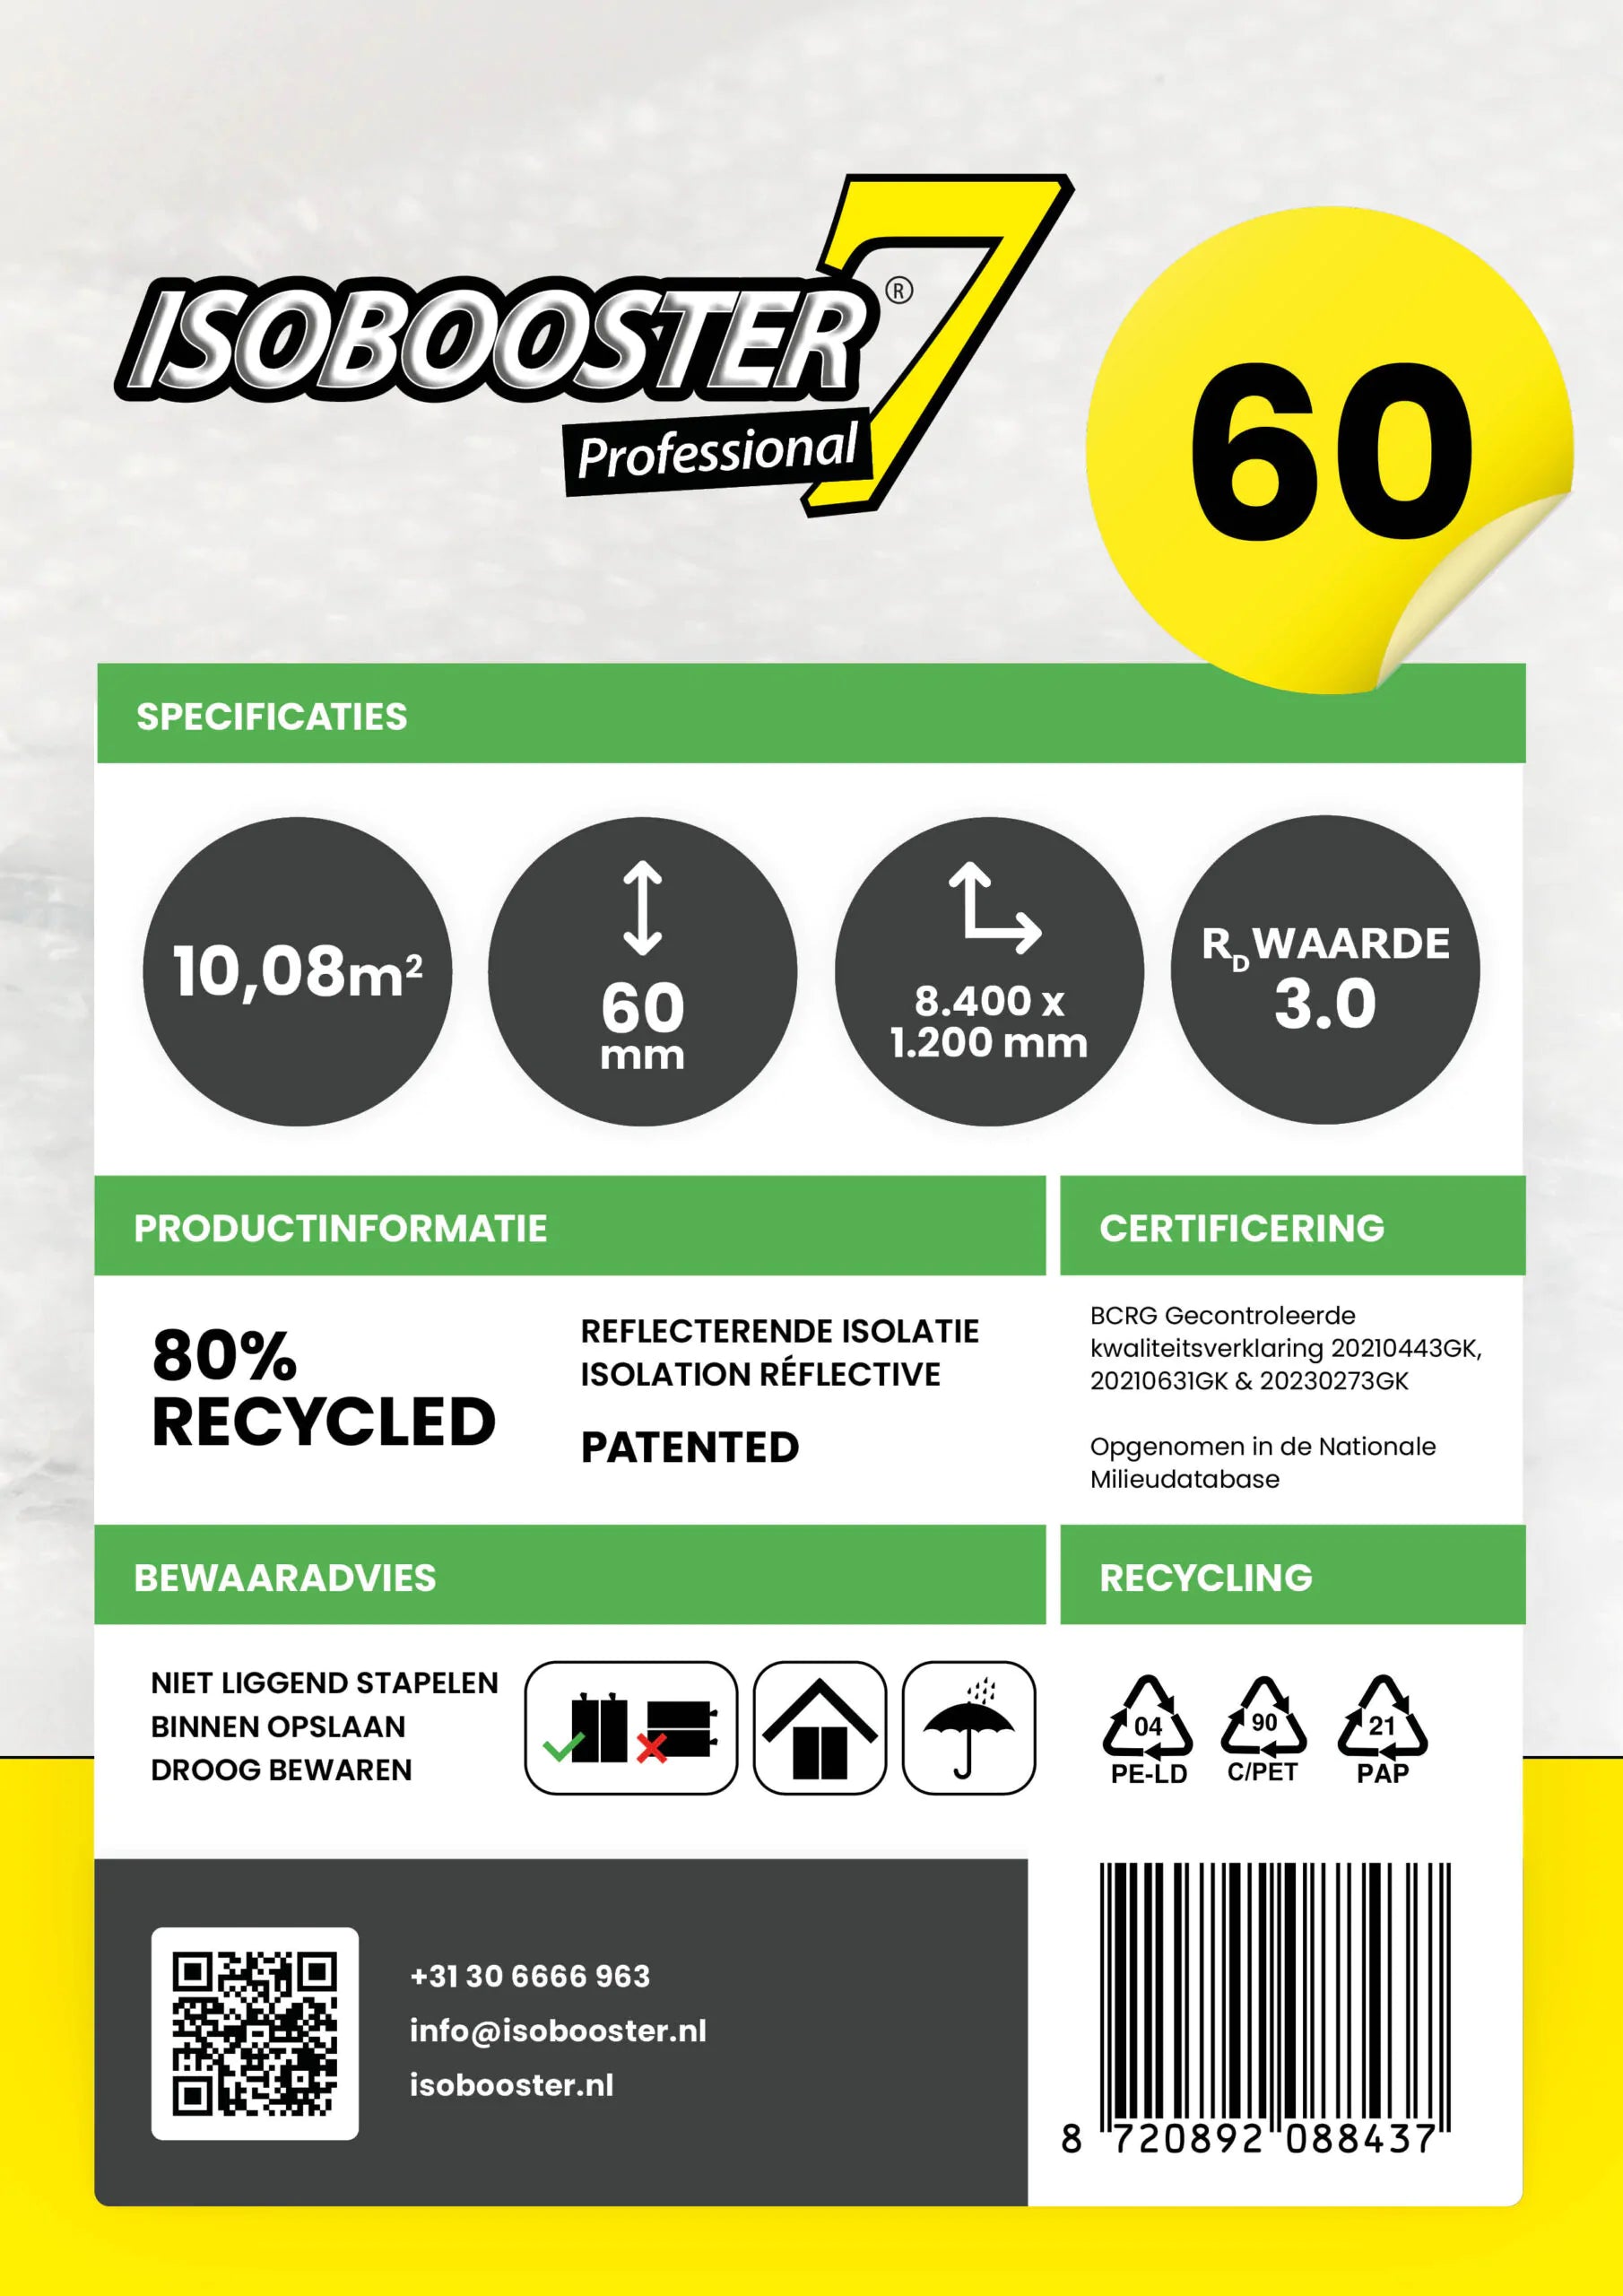 Isobooster Professional 60mm